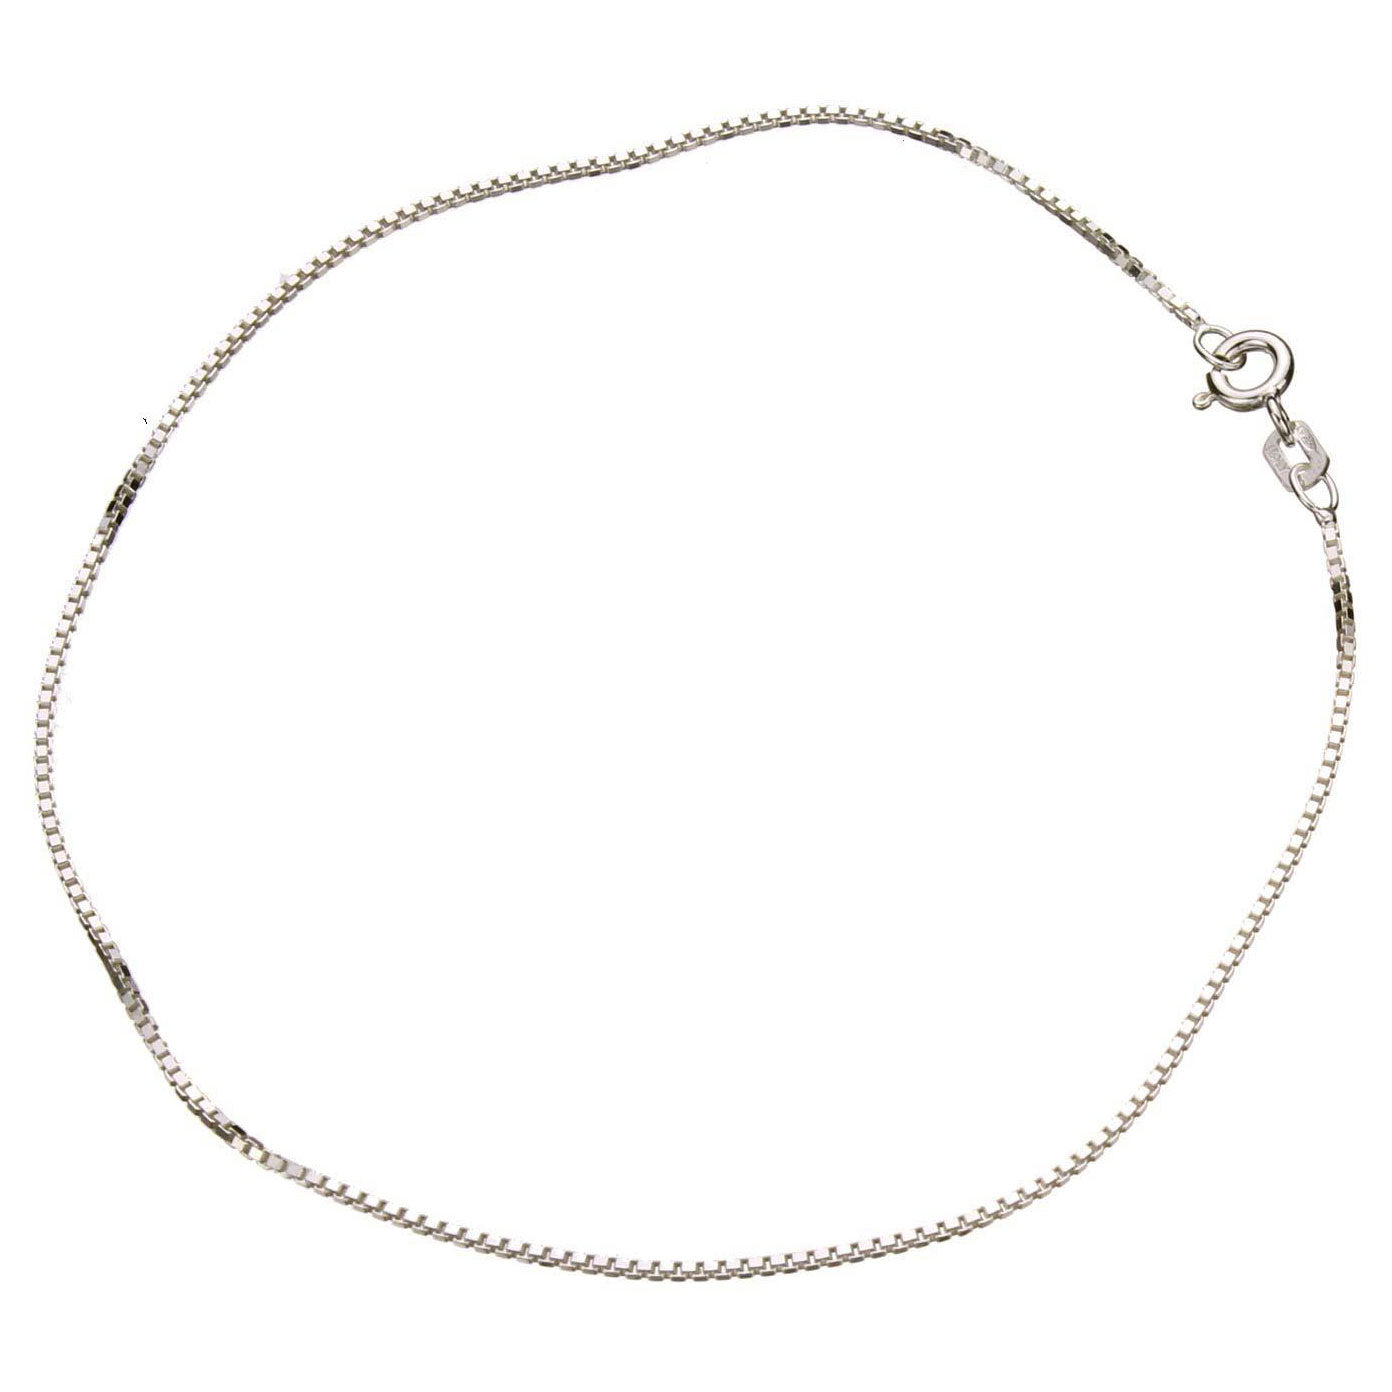 Sterling Silver 1.1mm Box Link Nickel Free Chain Anklet Italy